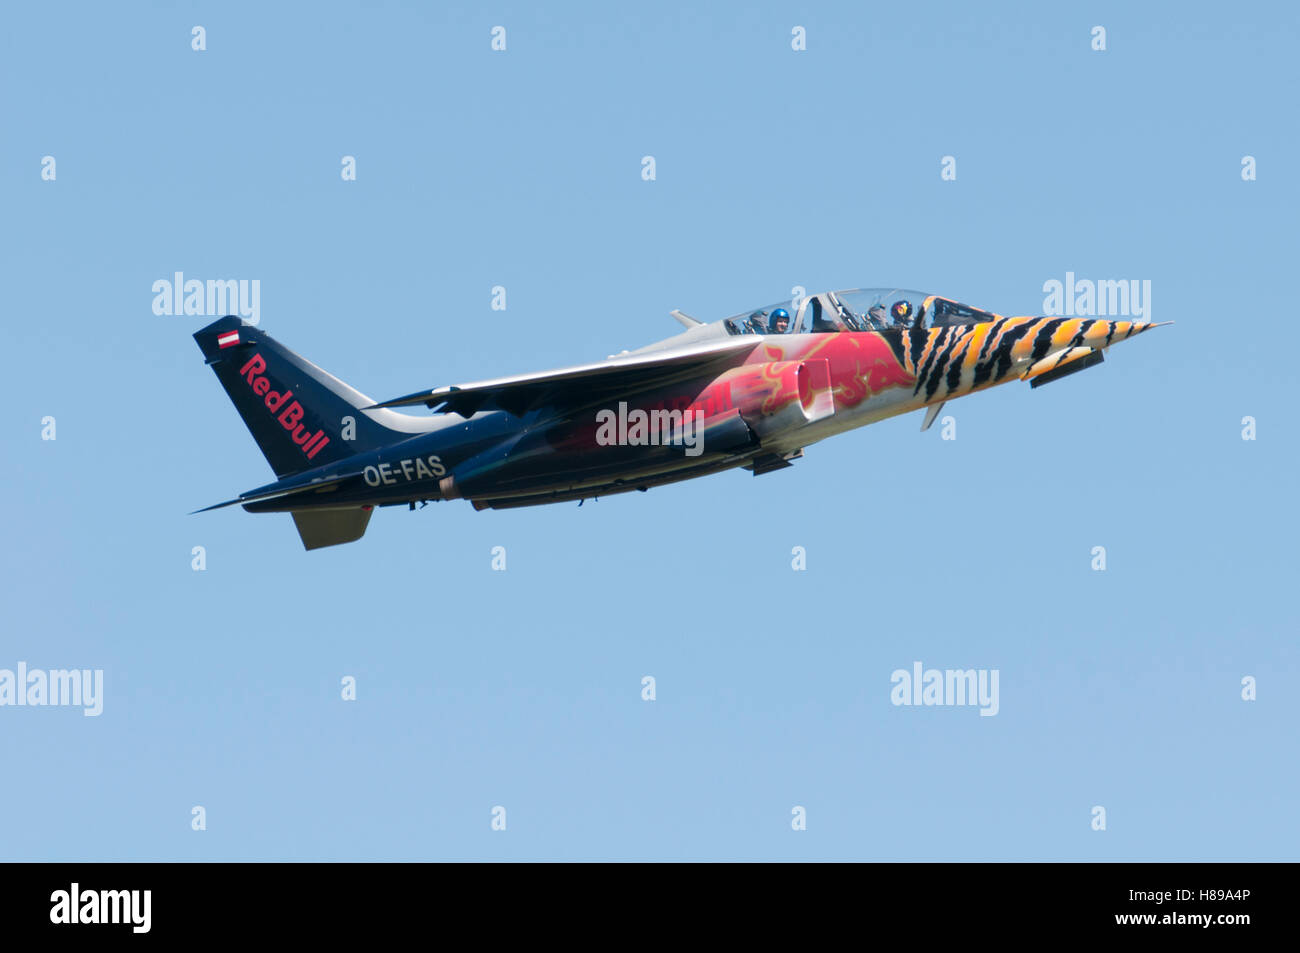 Maribor, Slovenia - April 16, 2016: Red Bull's Alpha Jet as part of display team The Flying Bulls taking off Stock Photo